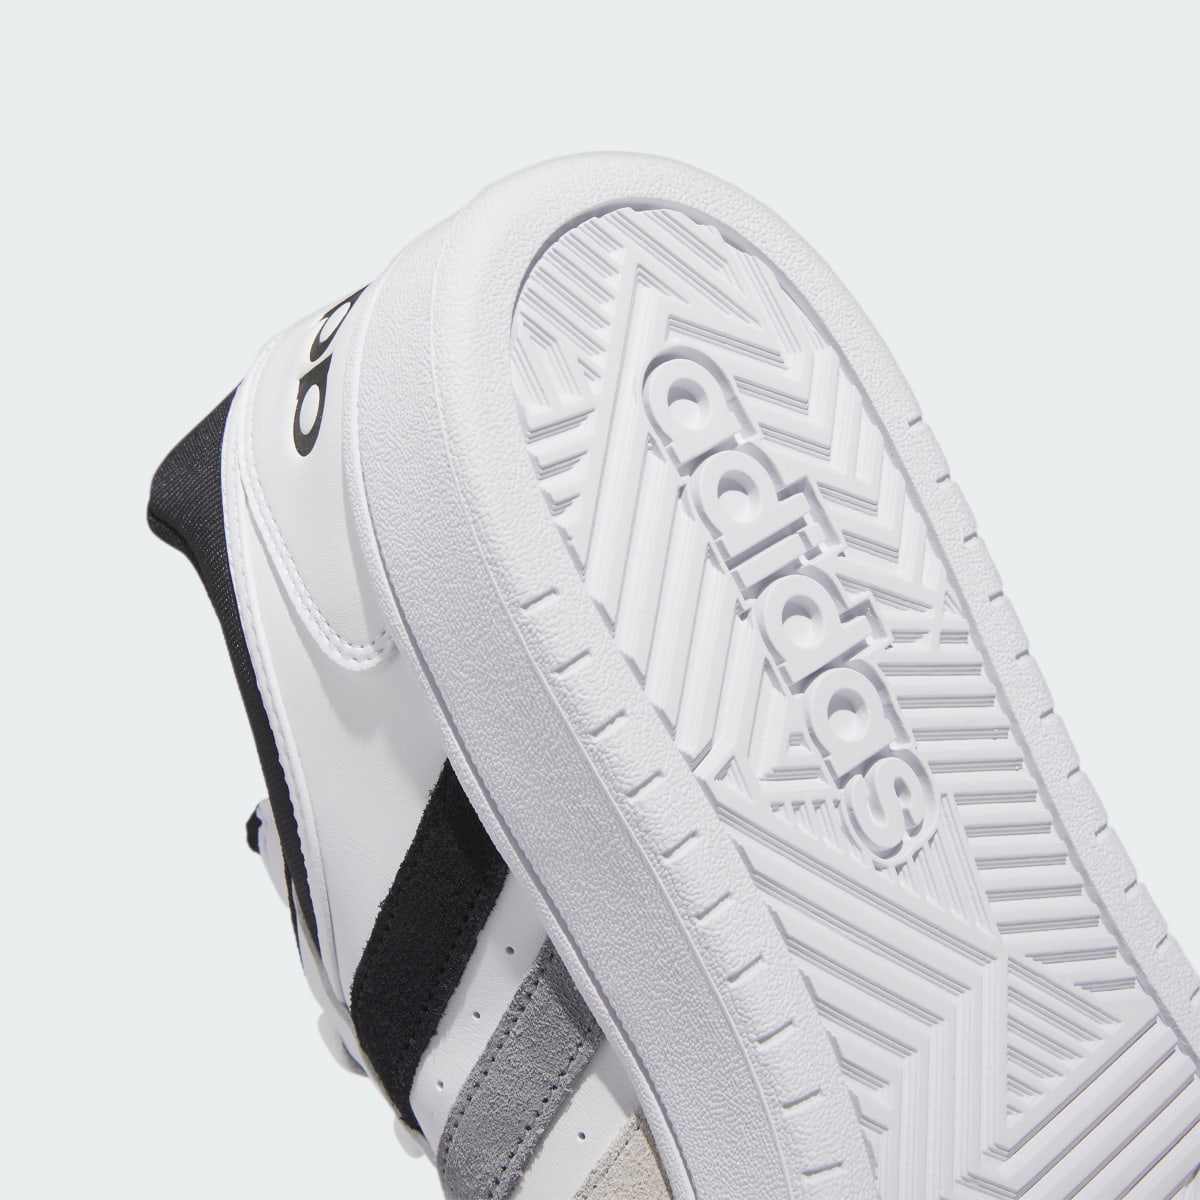 Adidas Hoops 3.0 Low Classic Vintage Shoes. 9